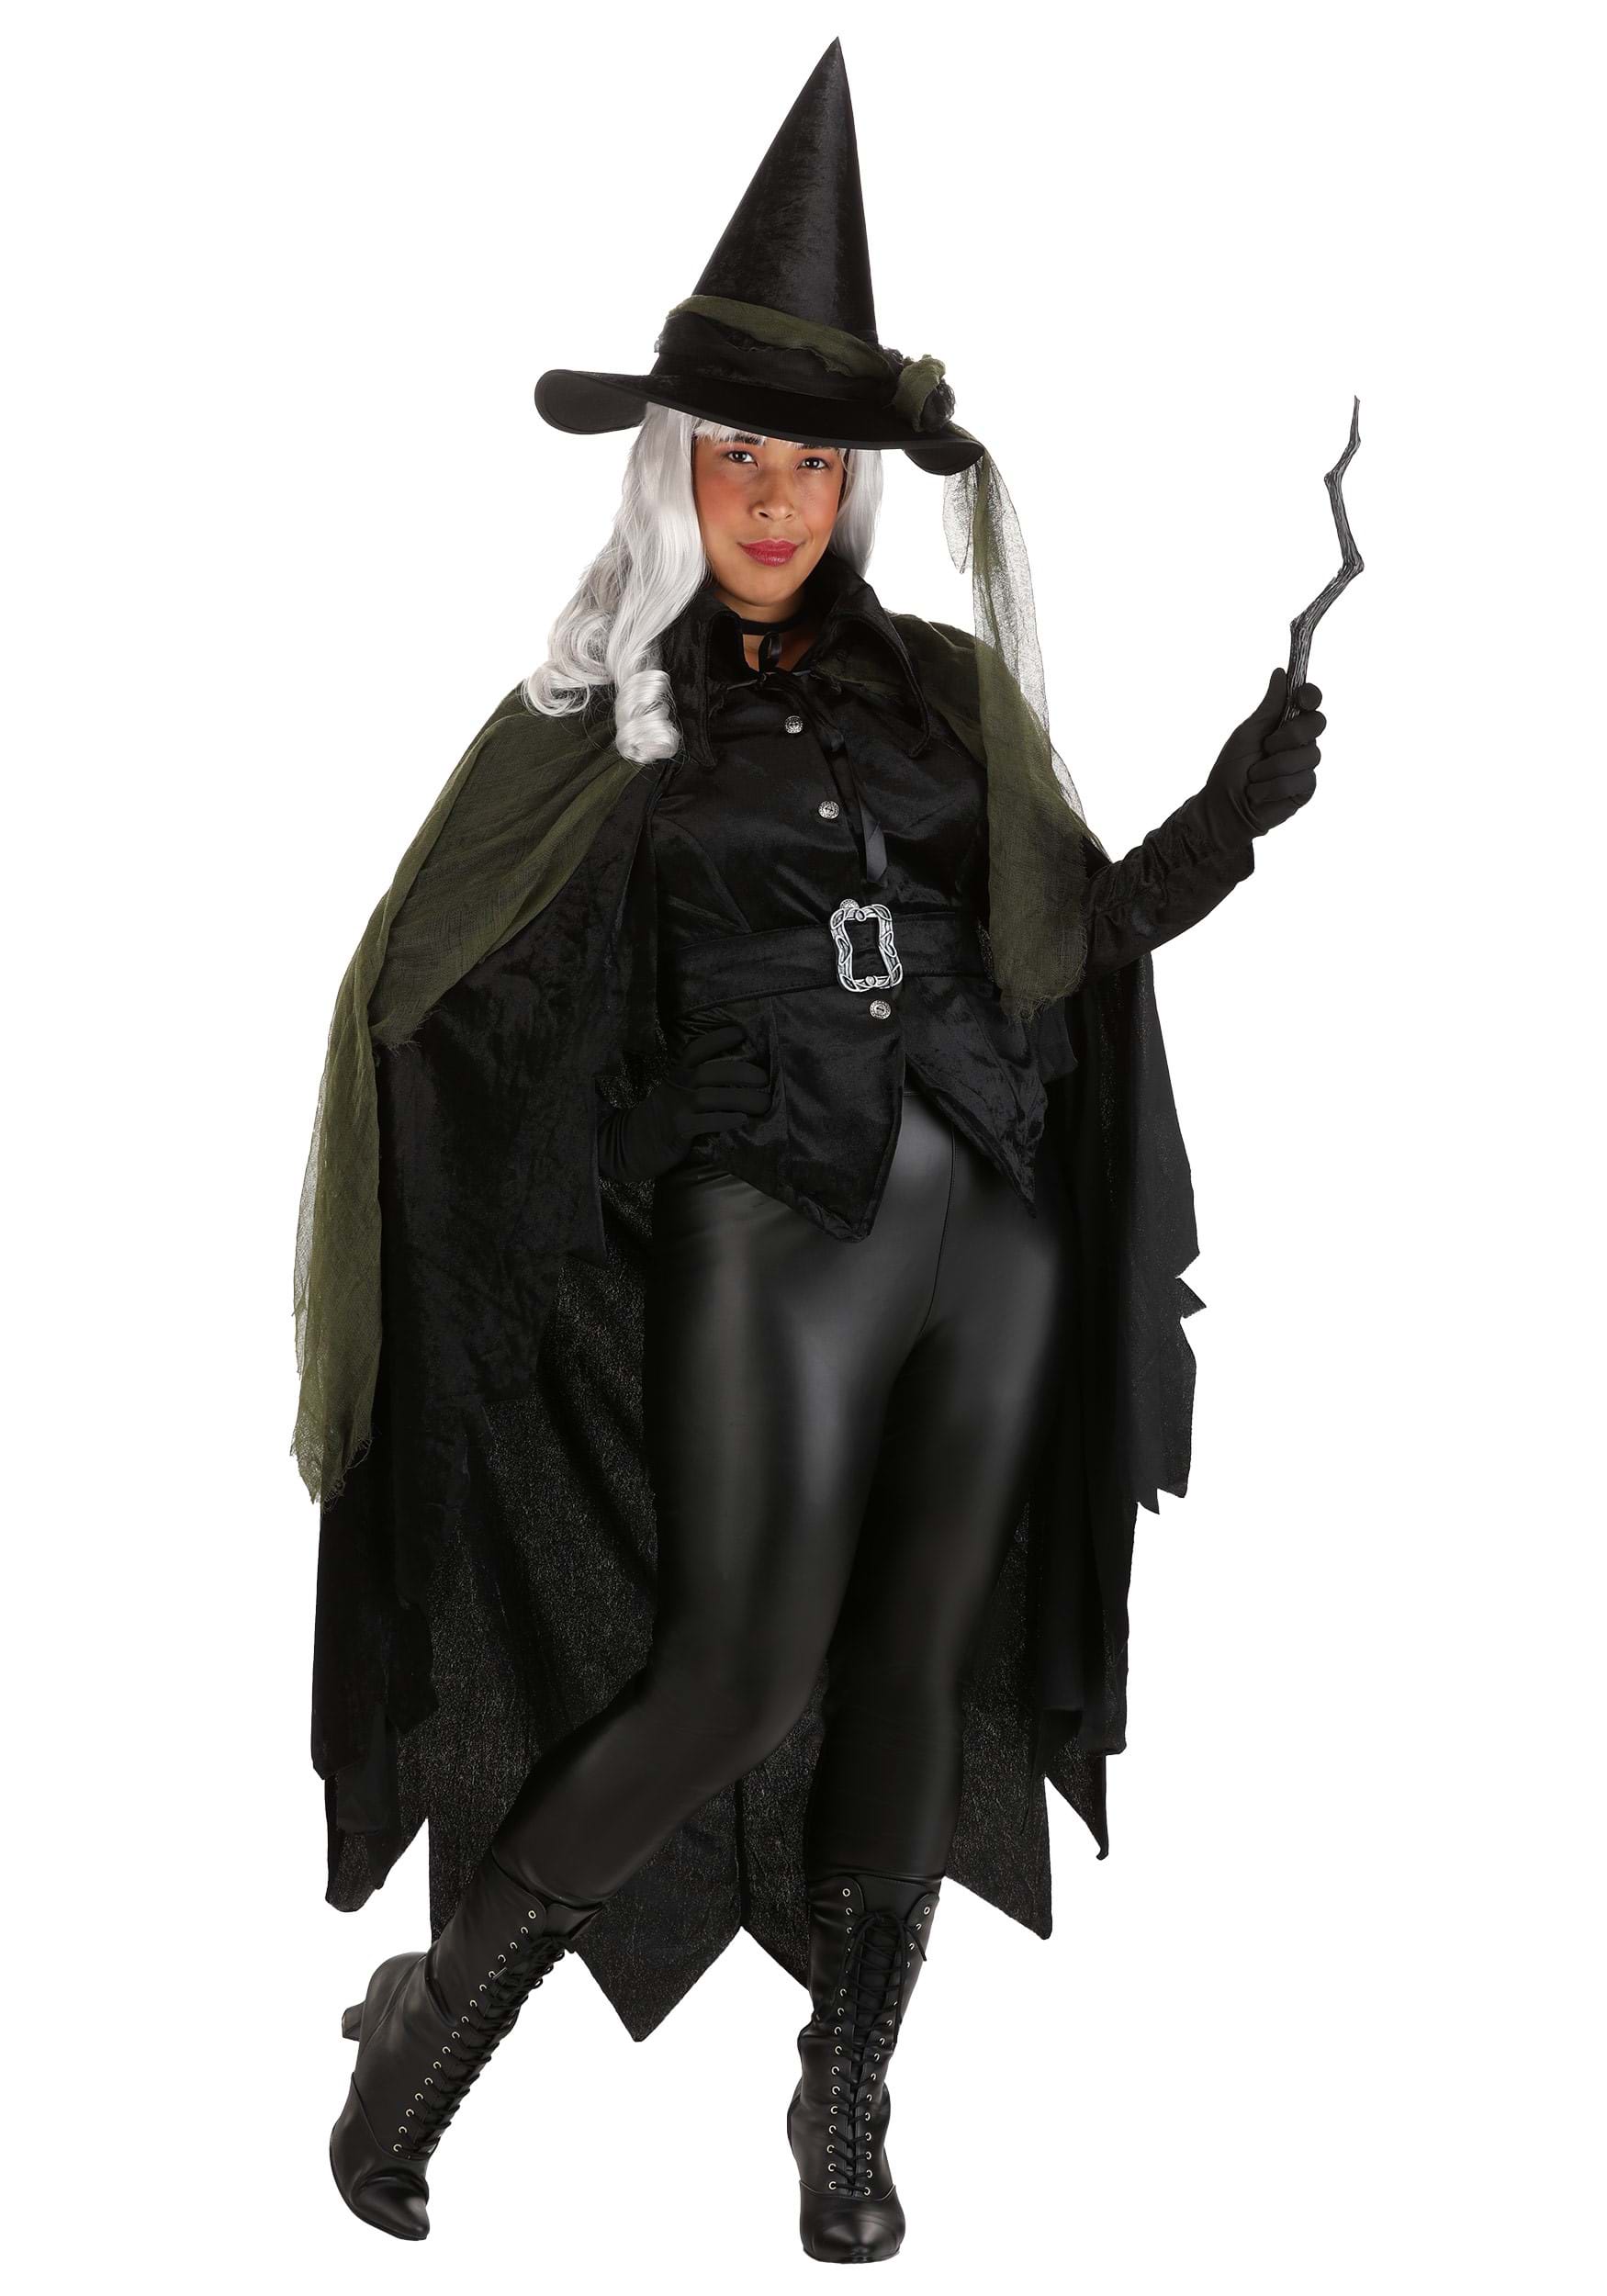 Cool Witch Fancy Dress Costume For Women , Adult Sorceress Fancy Dress Costume